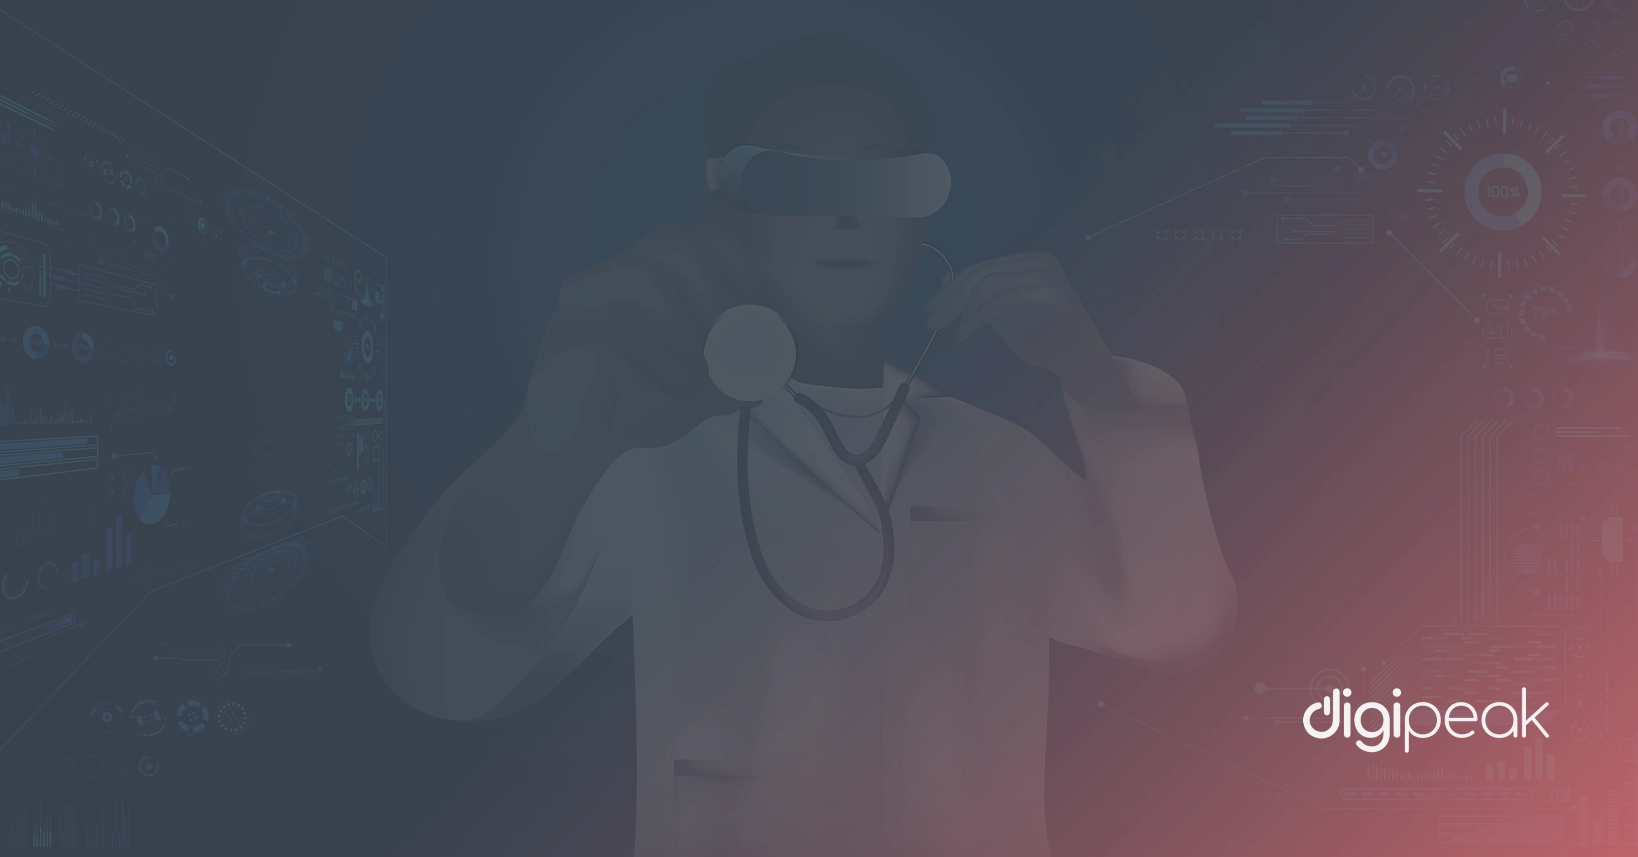 Metaverse is critical for Healthcare Industry